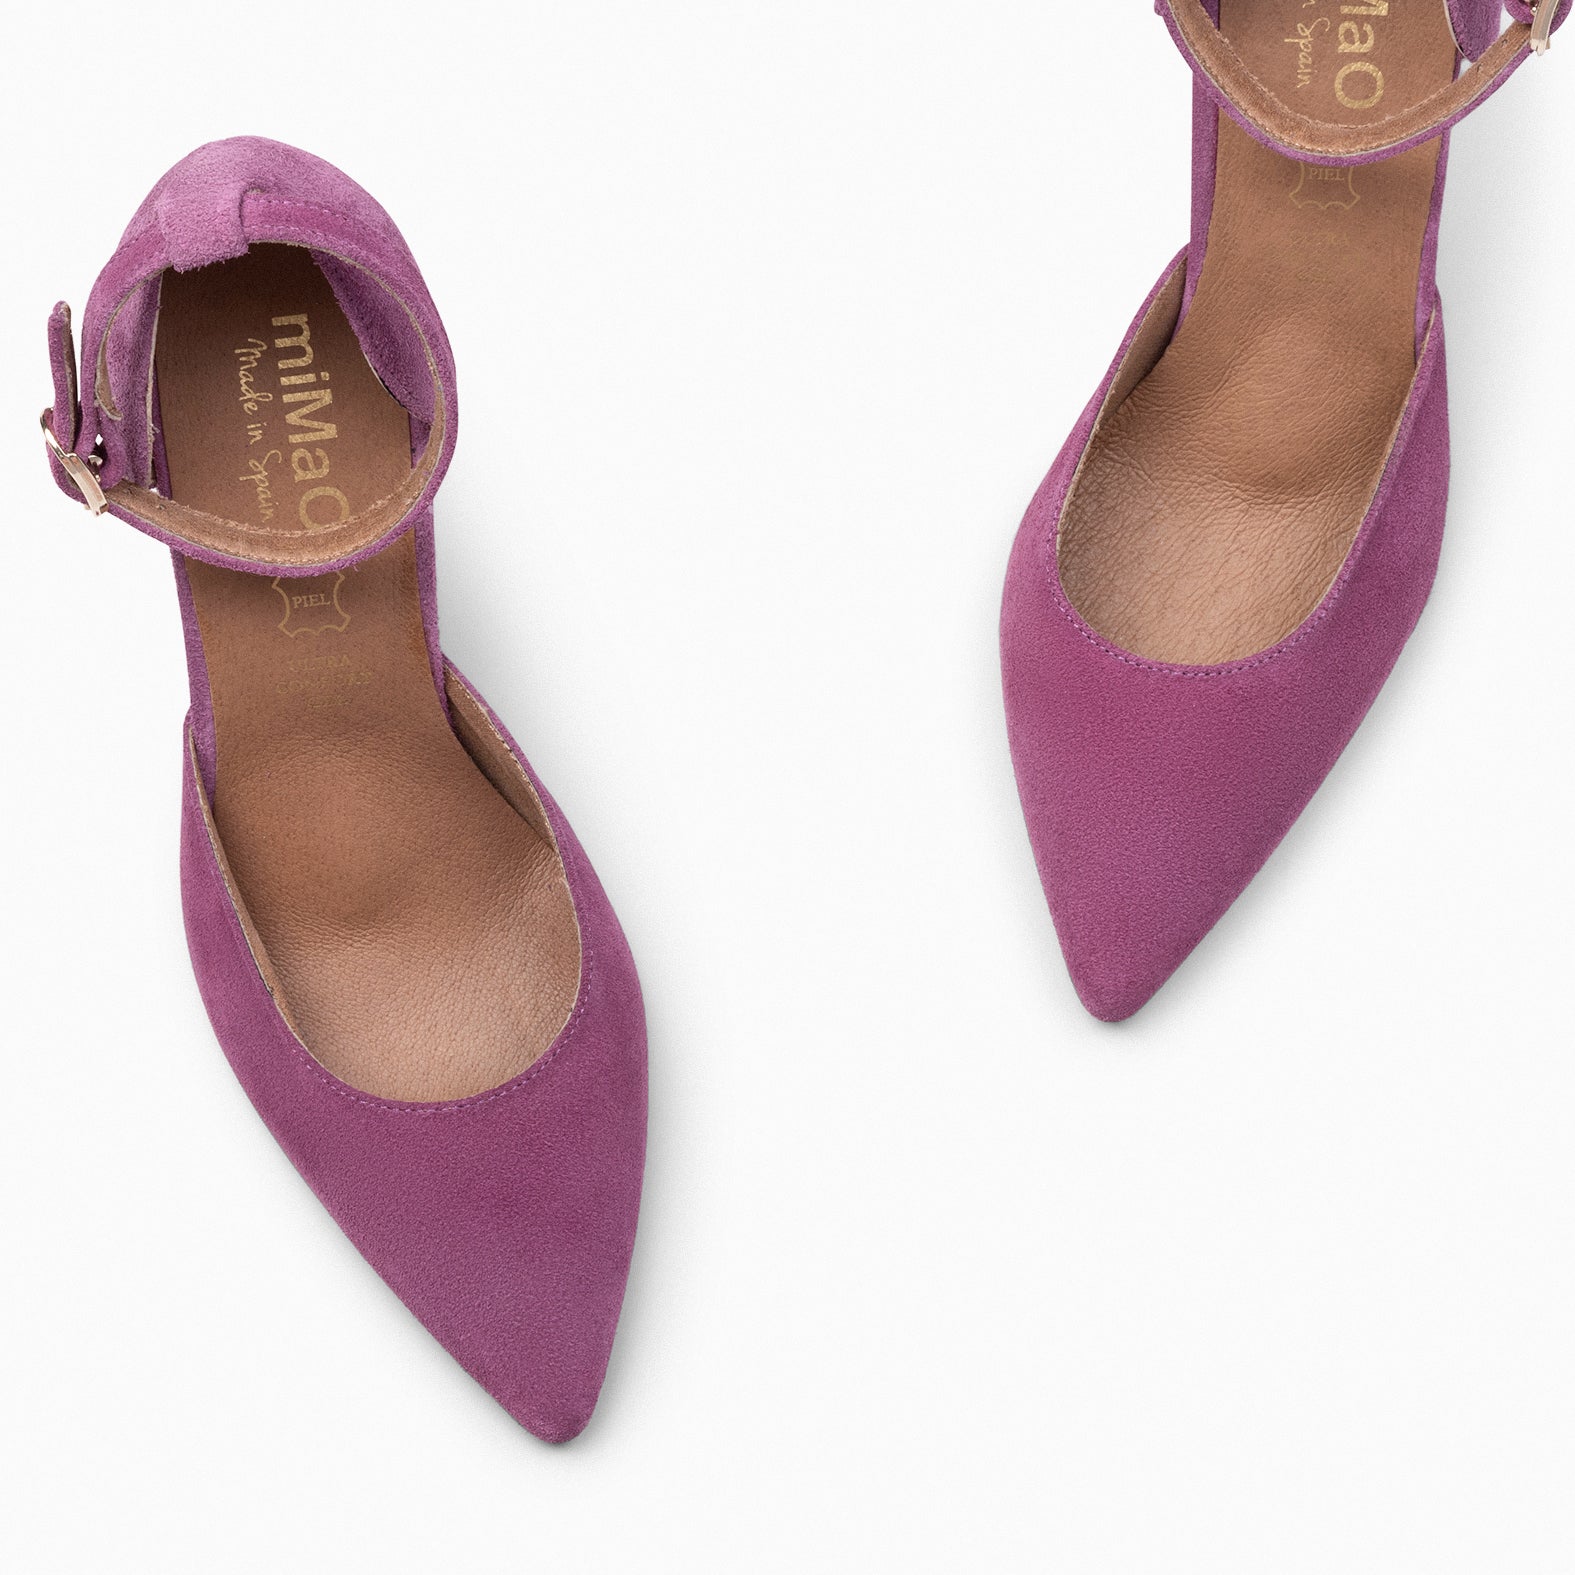 BY FAR - Eliza Patent Heel Pumps in Lilac By Far